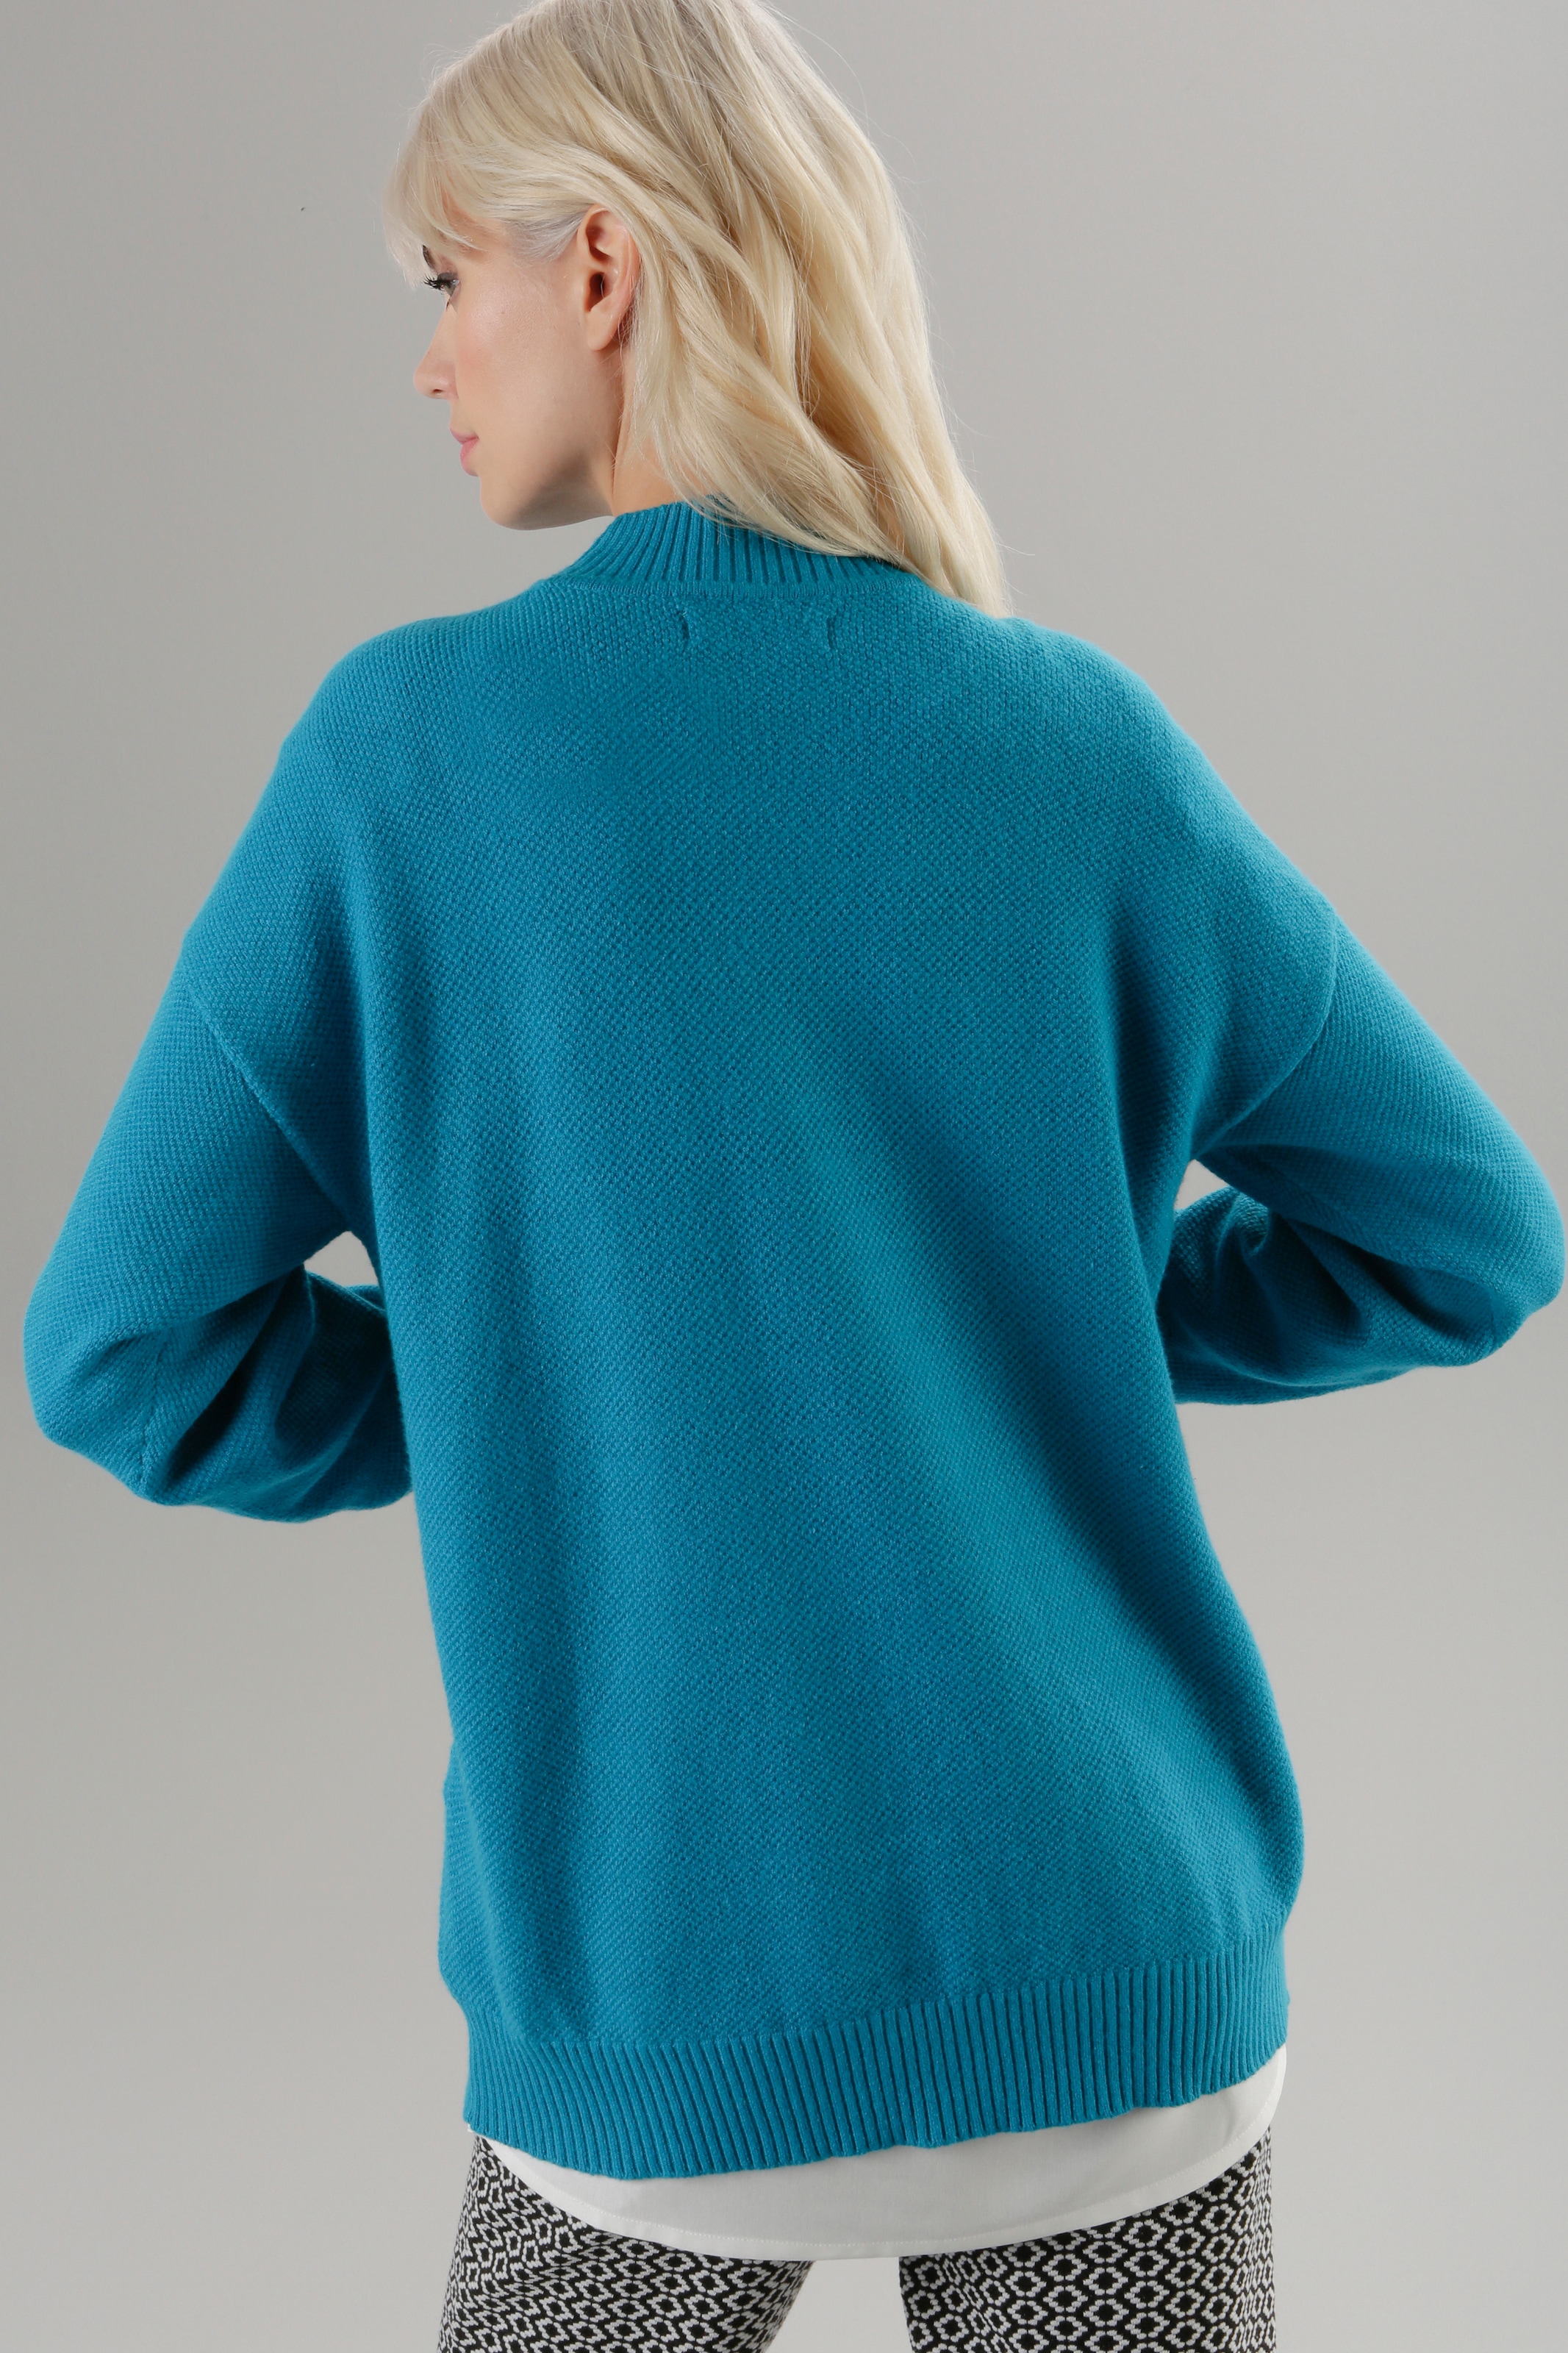 SELECTED Strickpullover, bei mit Perlfangmuster Aniston feinem online